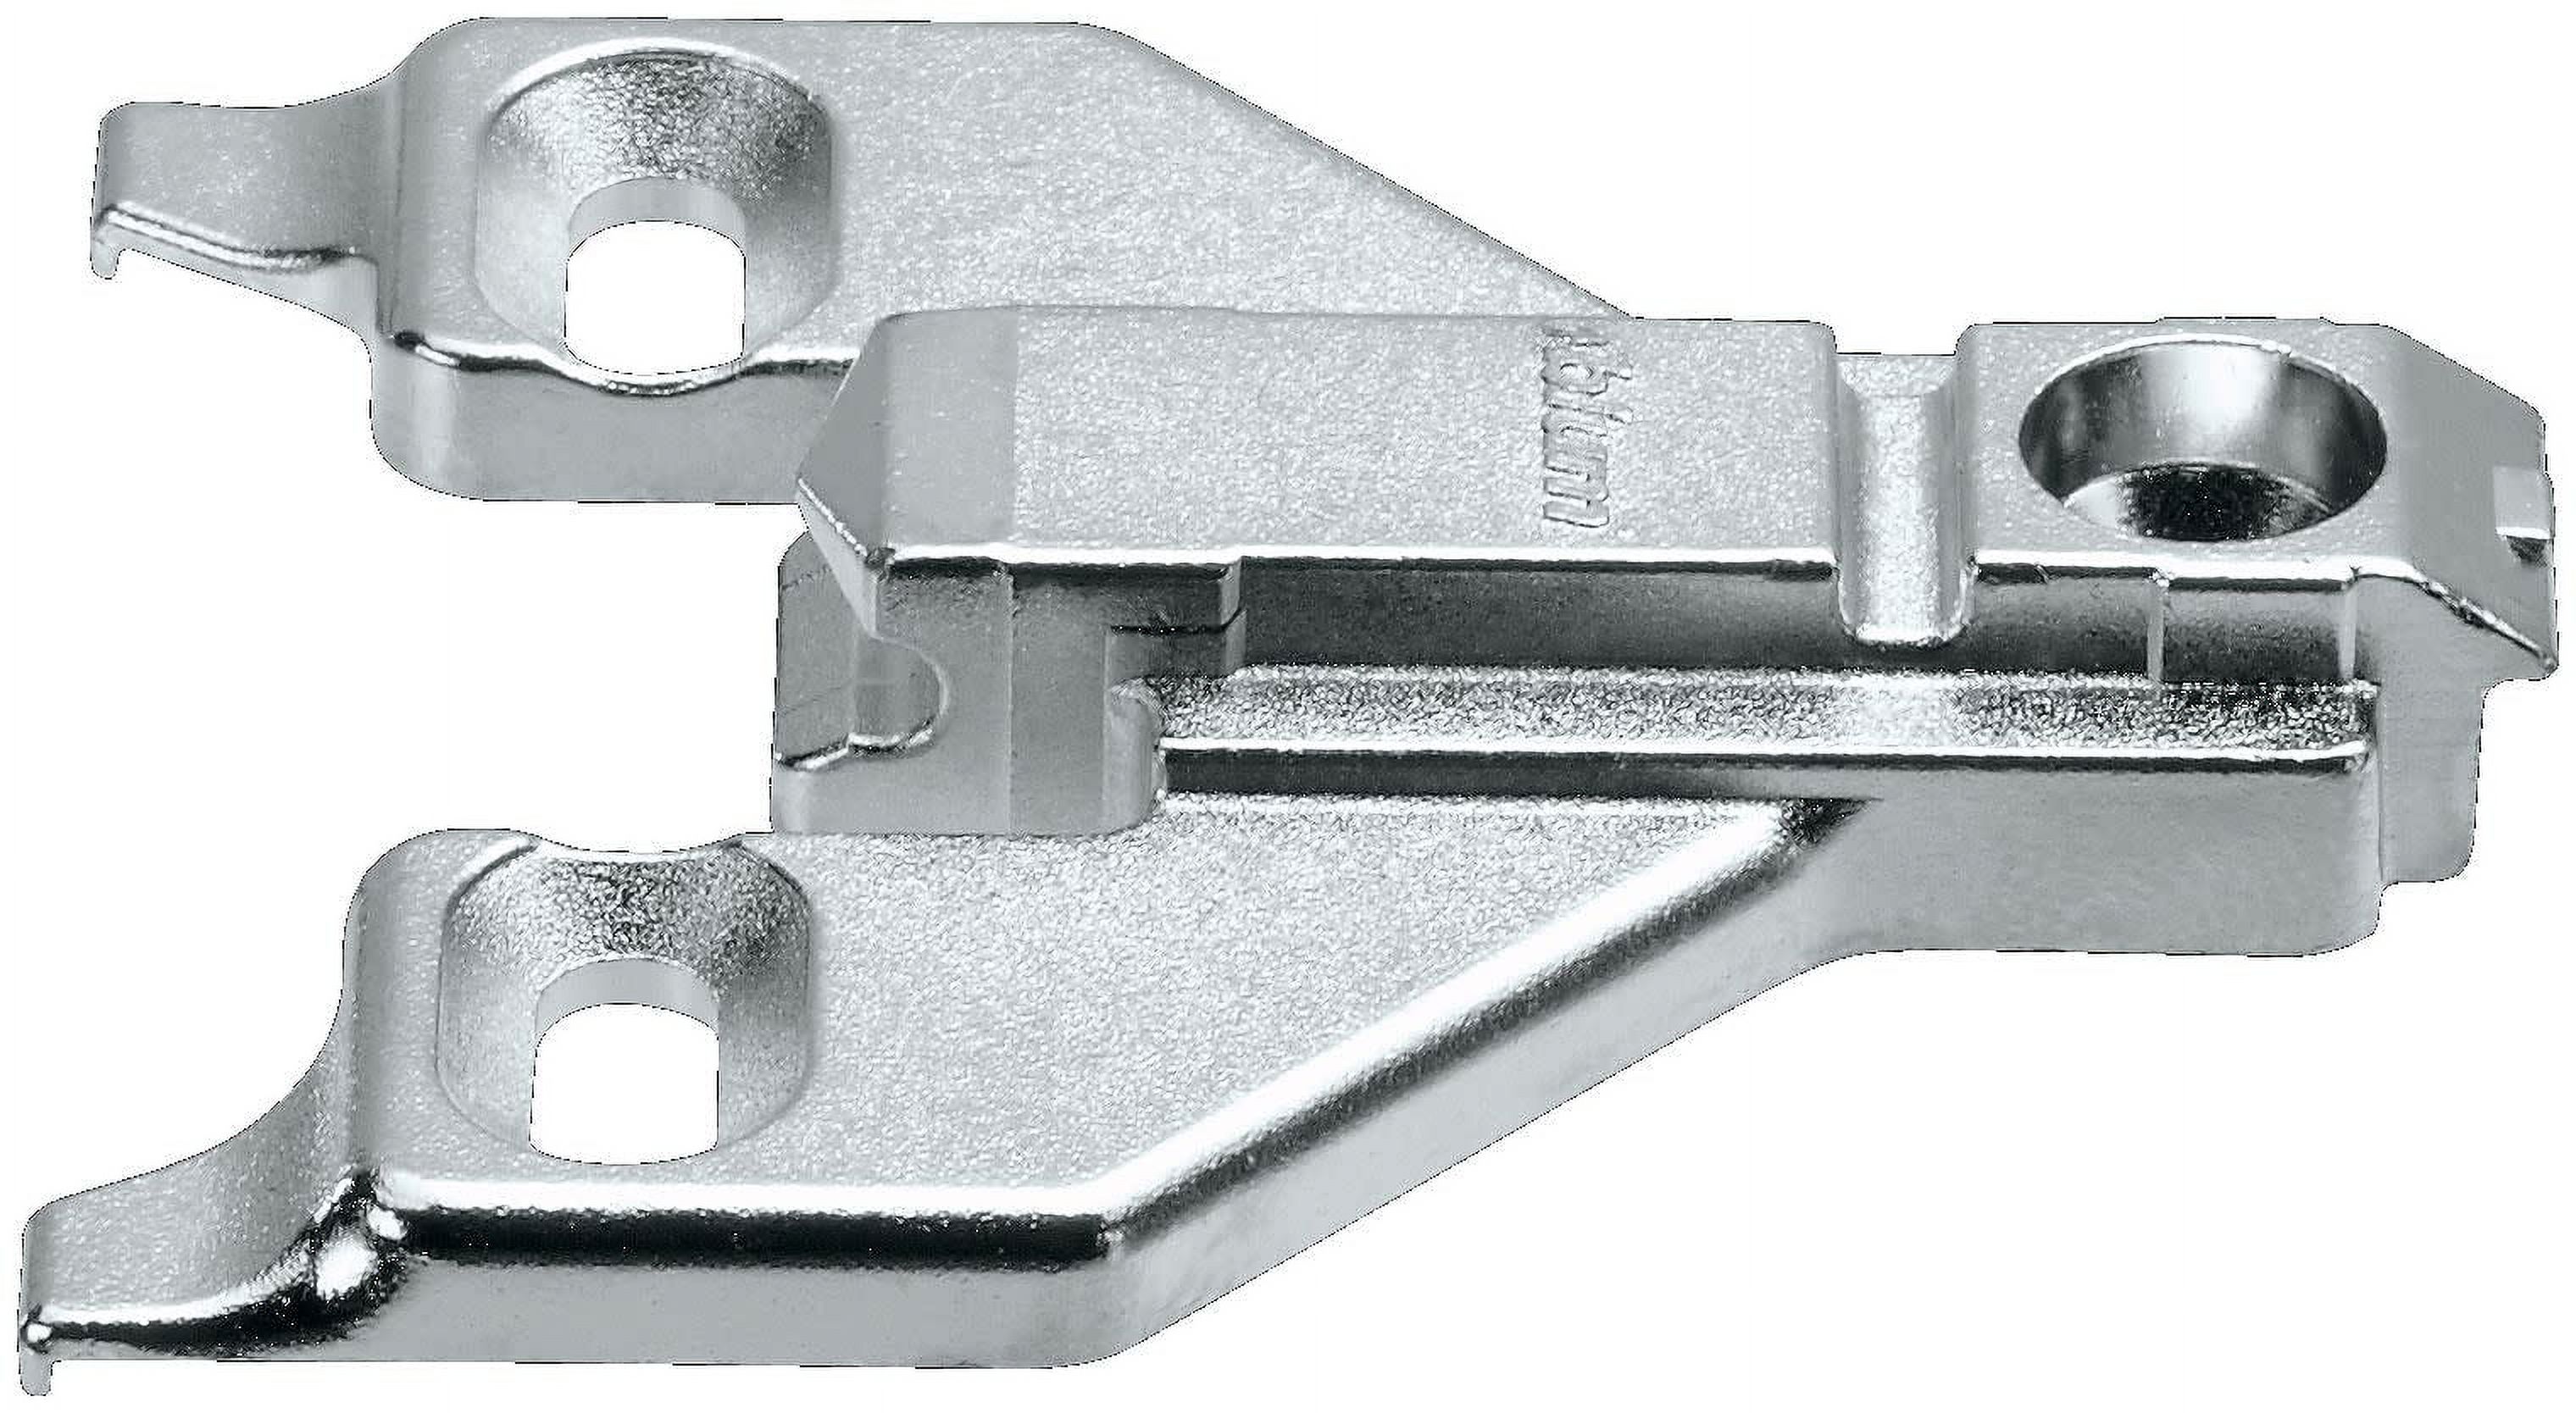 Blum 175L6660.22 Clip Top Face Frame Adapter Plate - Nickel - image 1 of 1